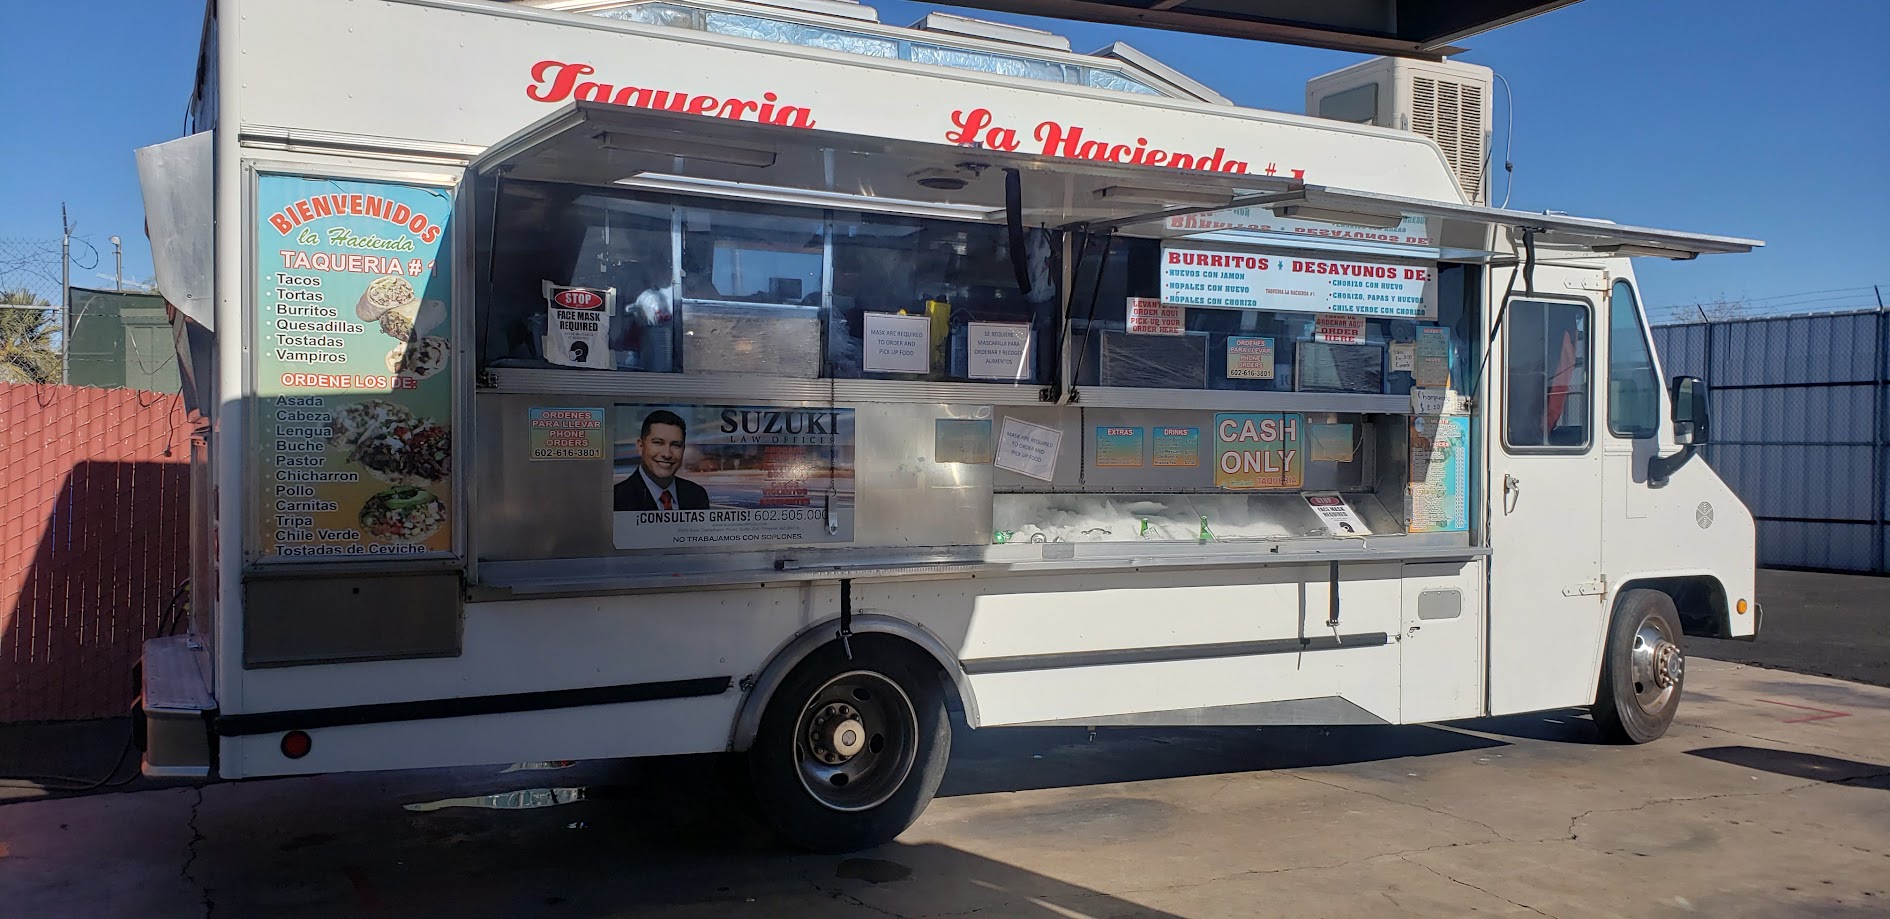 Mexican Food Truck